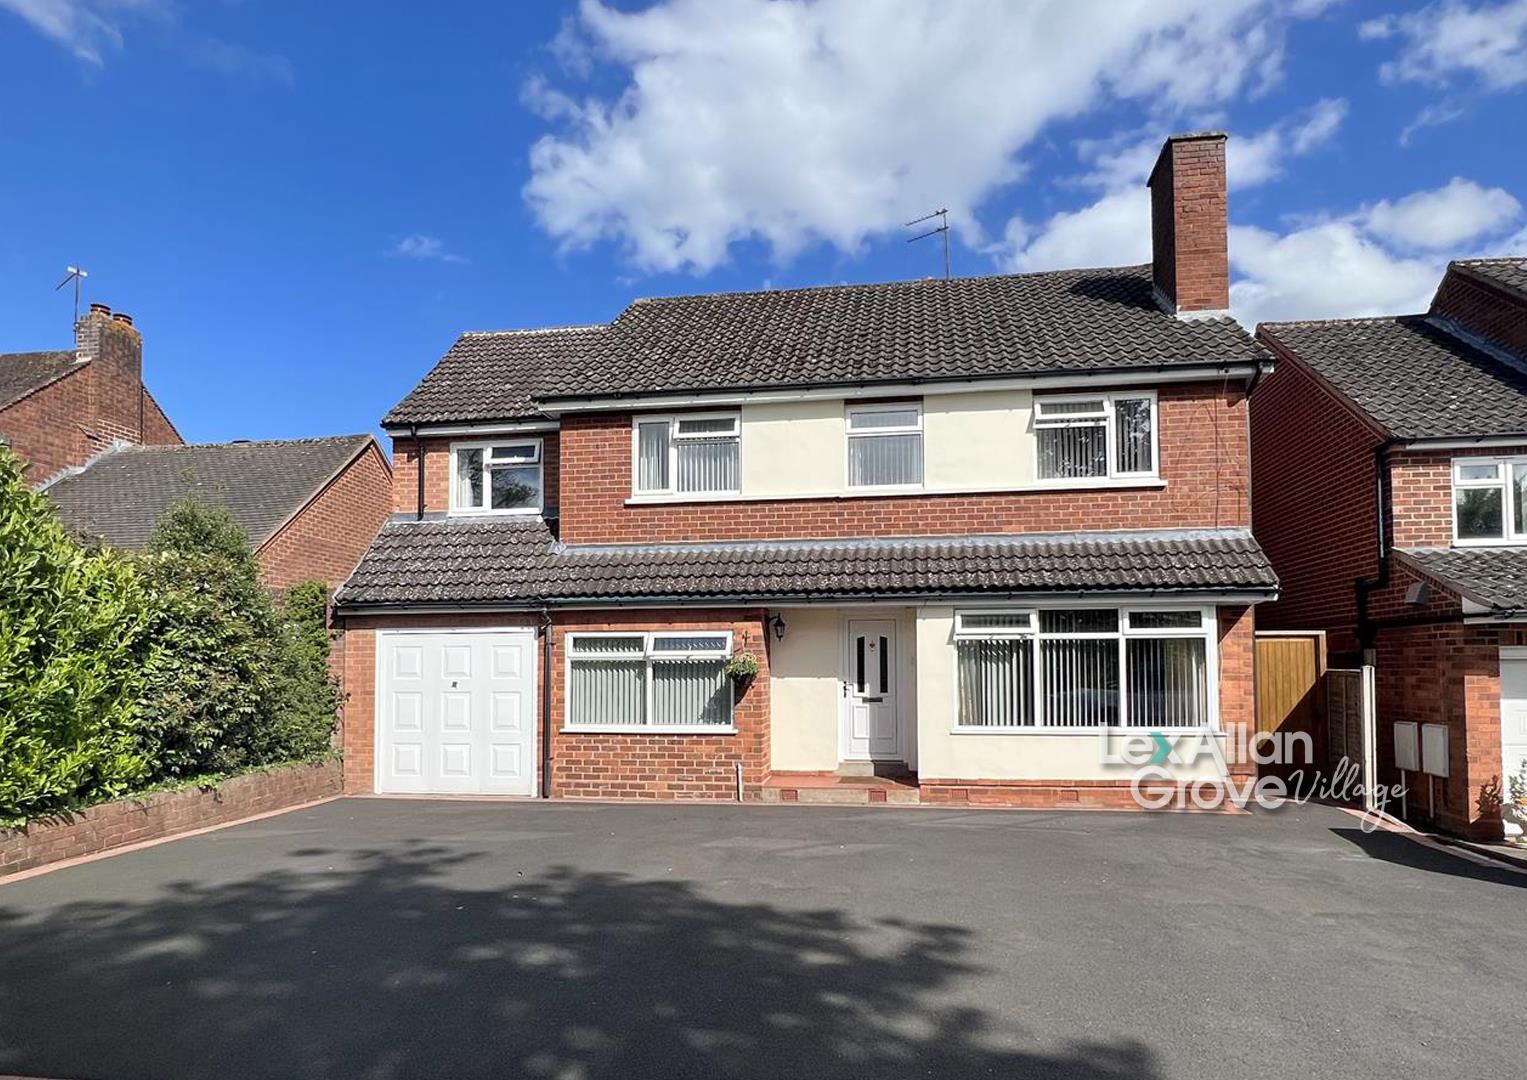 5 bed detached house for sale in Worcester Road, Stourbridge, DY9 